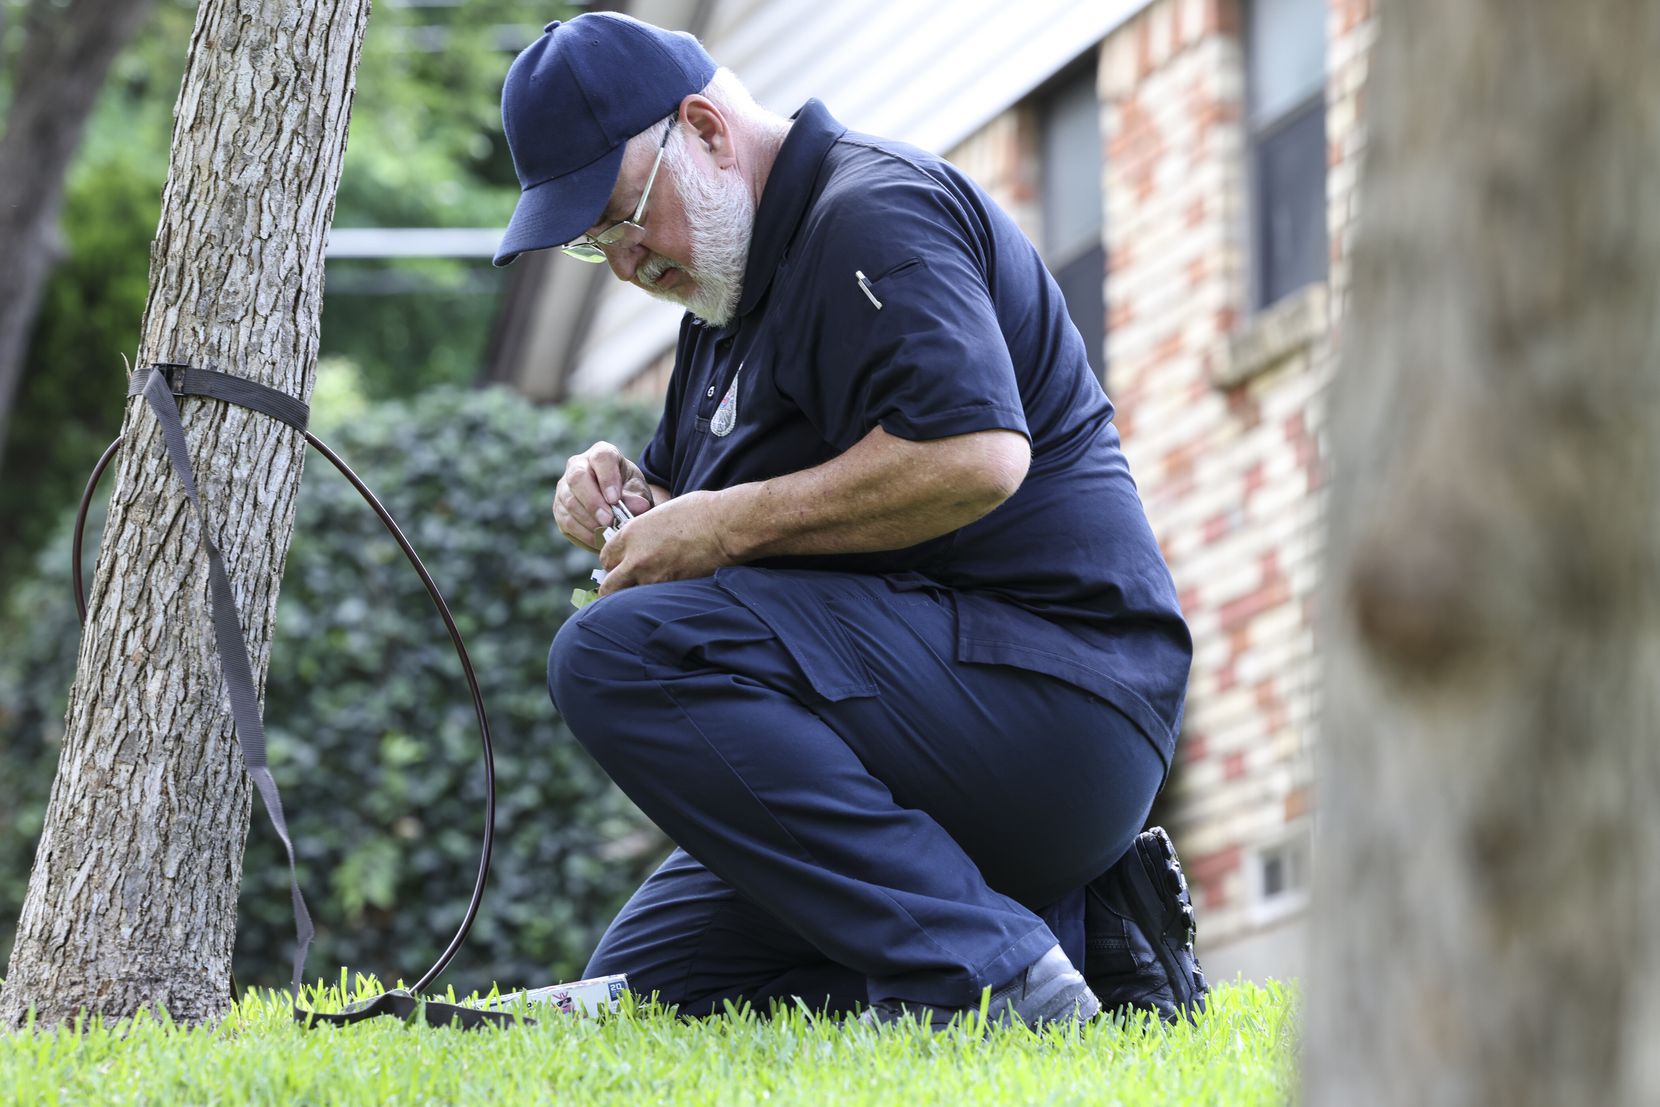 A City of Dallas animal services officer removed a camera from a tree two doors down...